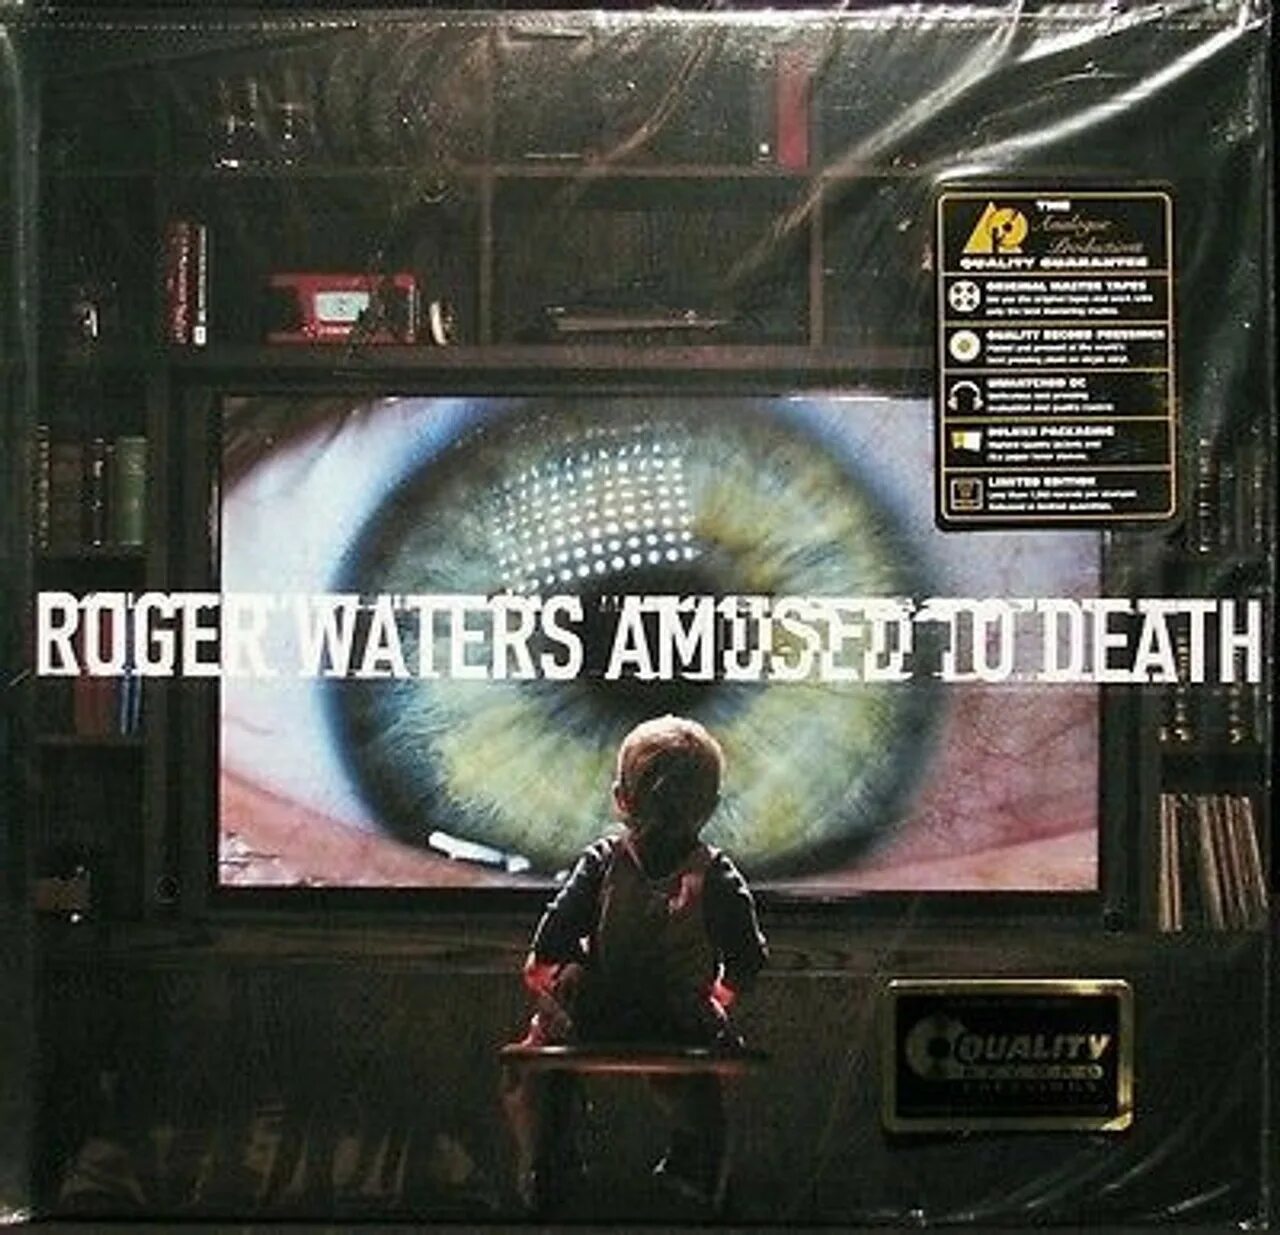 Amused to death. Amused to Death Роджер Уотерс. Roger Waters amused to Death 1992. Roger Waters amused to Death Vinyl. Roger Waters amused to Death LP.